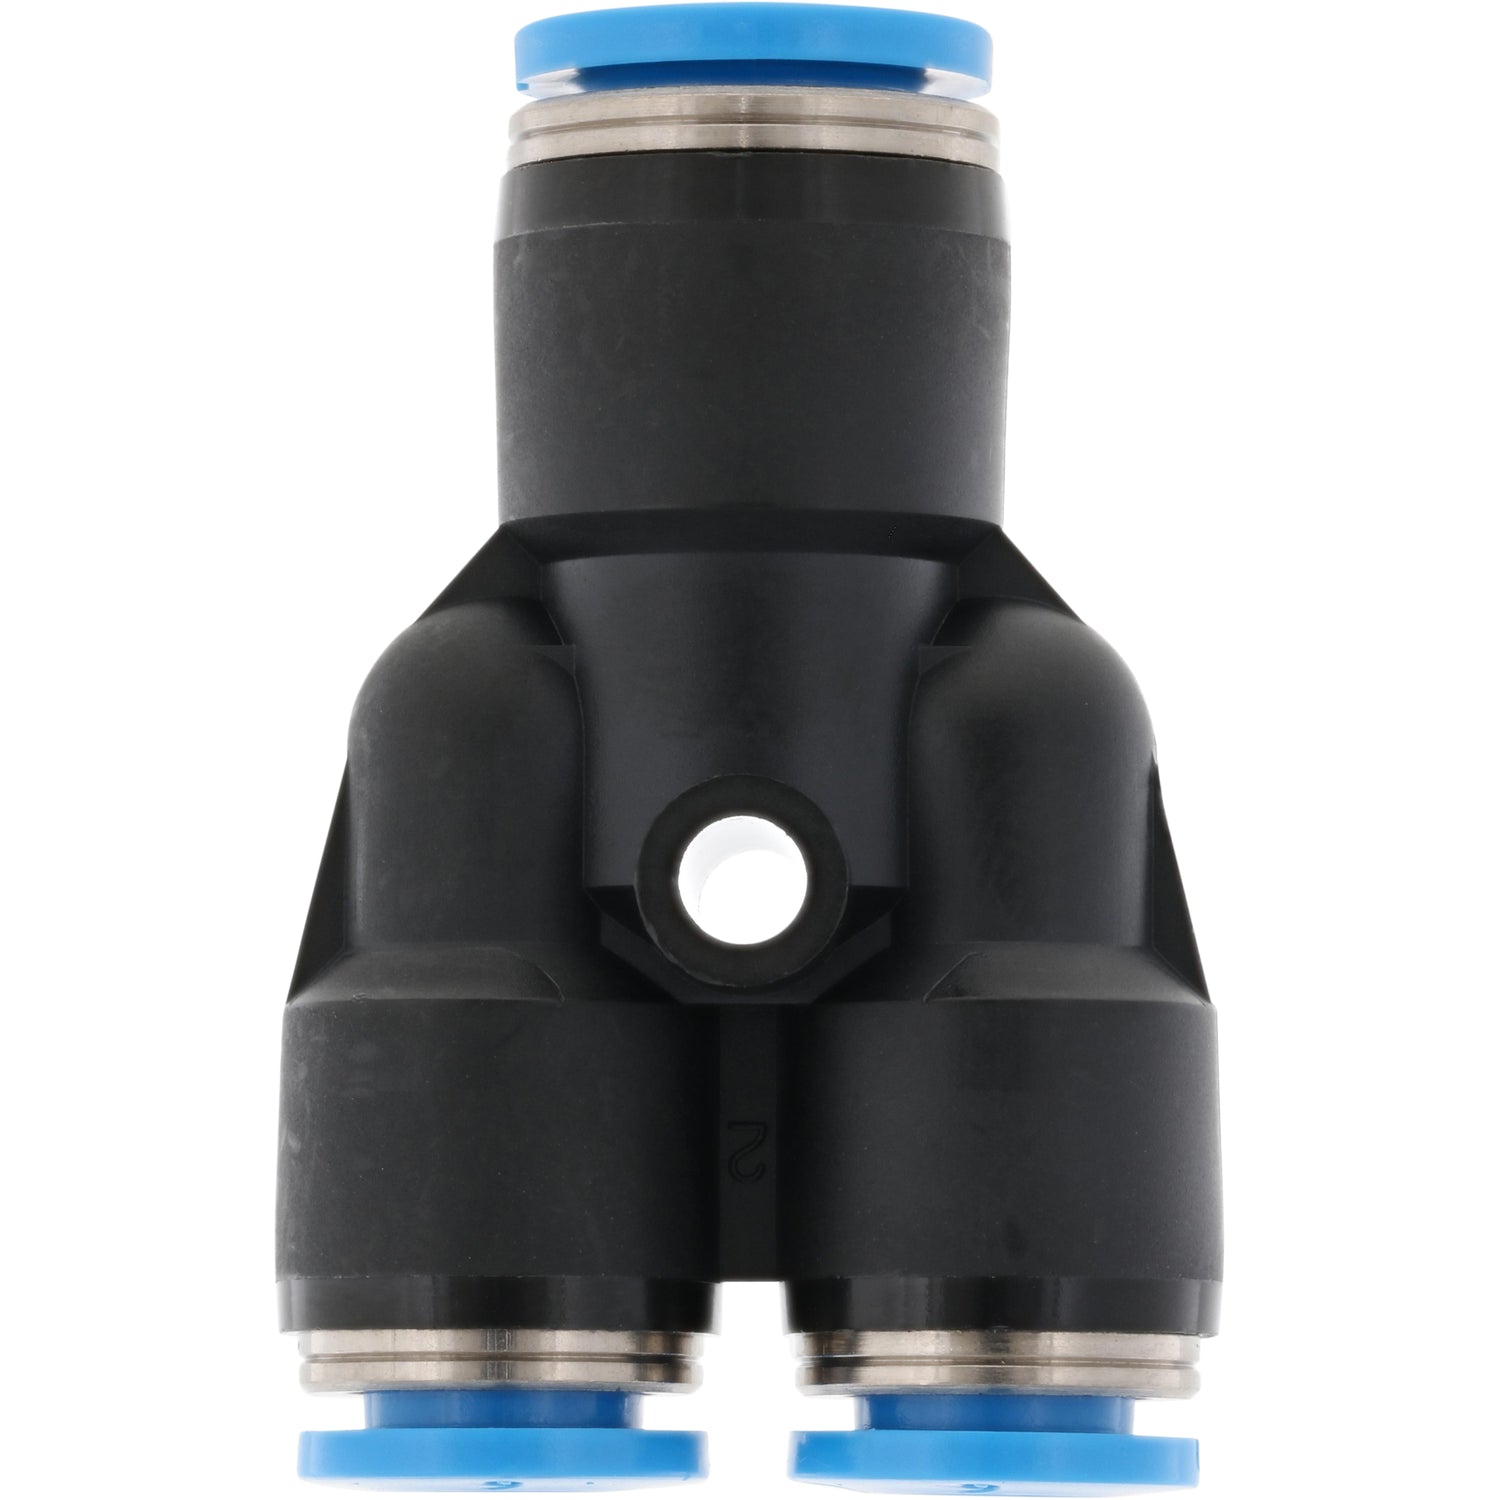 Black and blue plastic push connect Y-fitting. Part is shown on white background. 